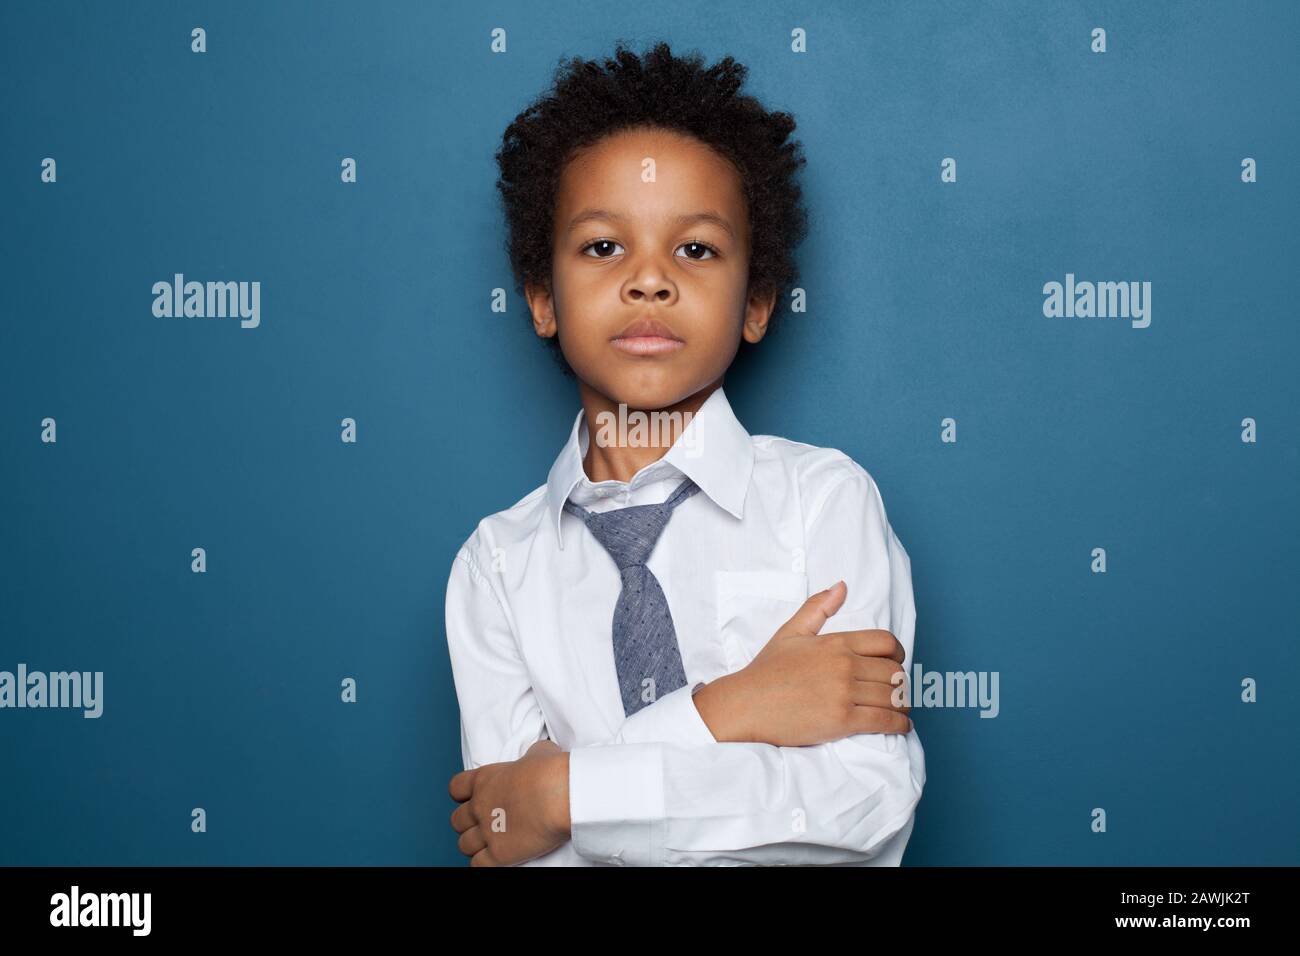 Smart black kid boy student with crossed arms on blue background. Little child  school boy Stock Photo